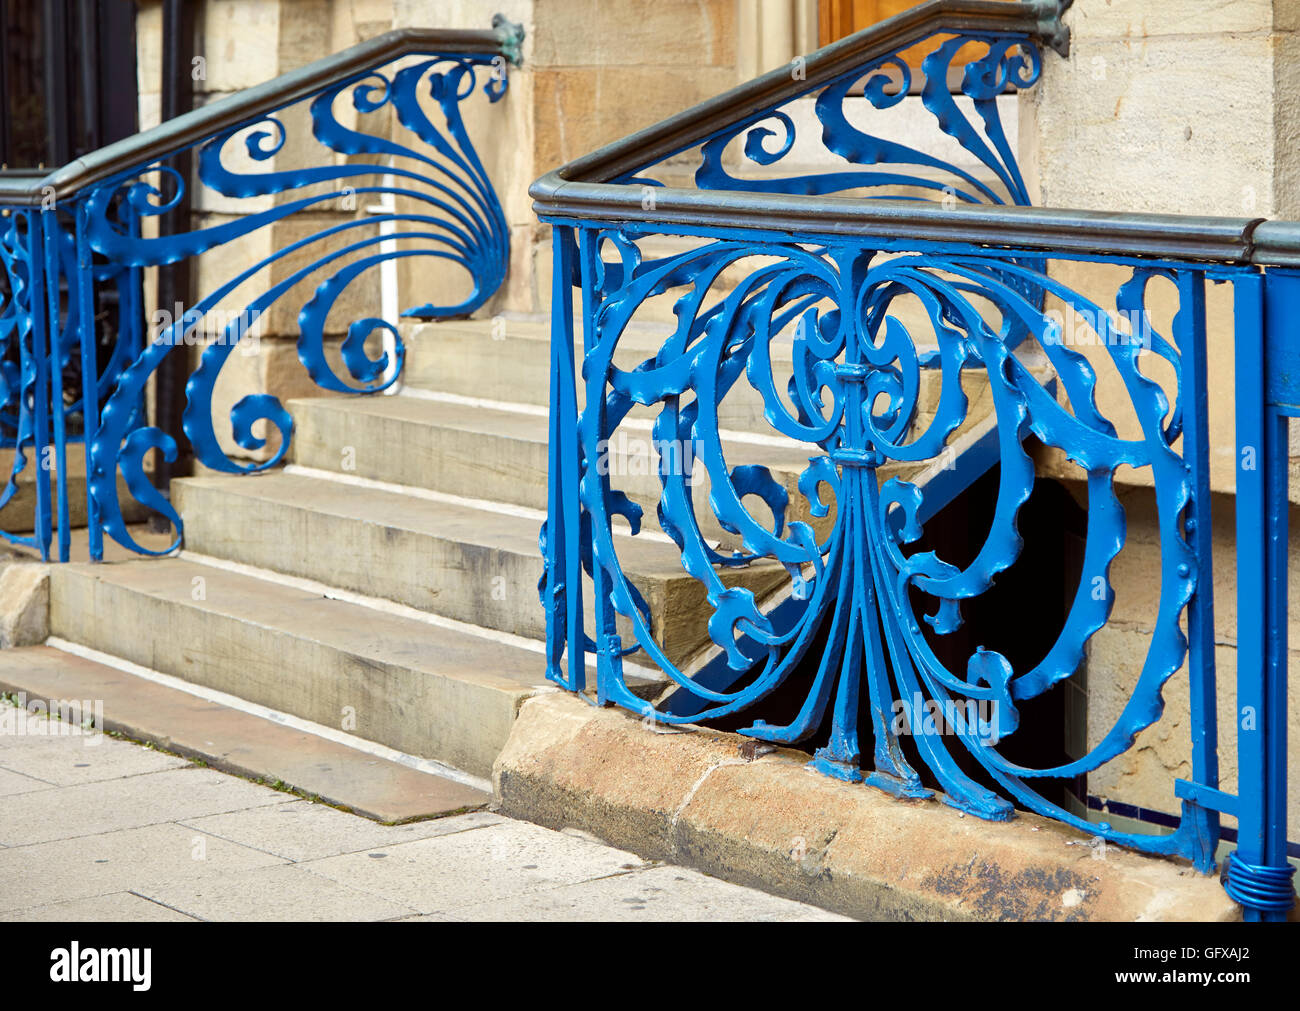 Blue painted art nouveau wrought iron railings swirling ribbons with handrail and steps outside offices in Leeds Stock Photo